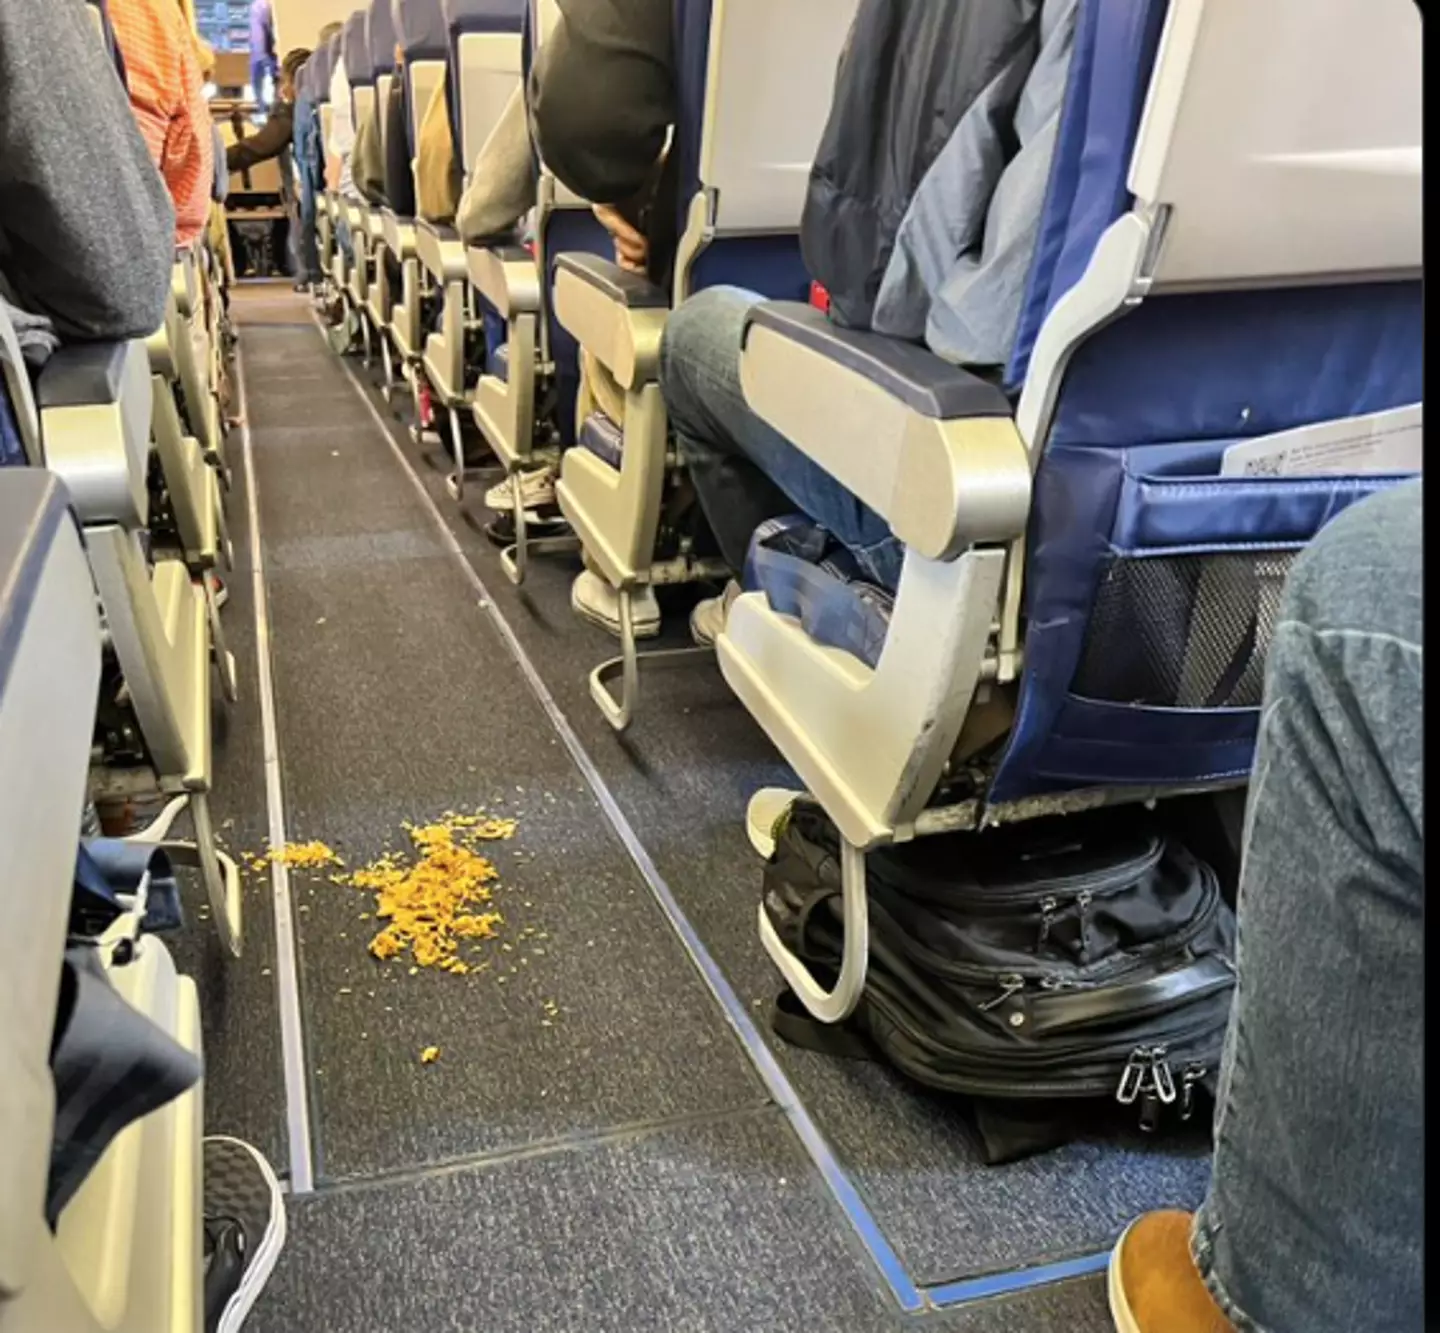 Rice had been spilled - and the flight attendant was not happy about it.